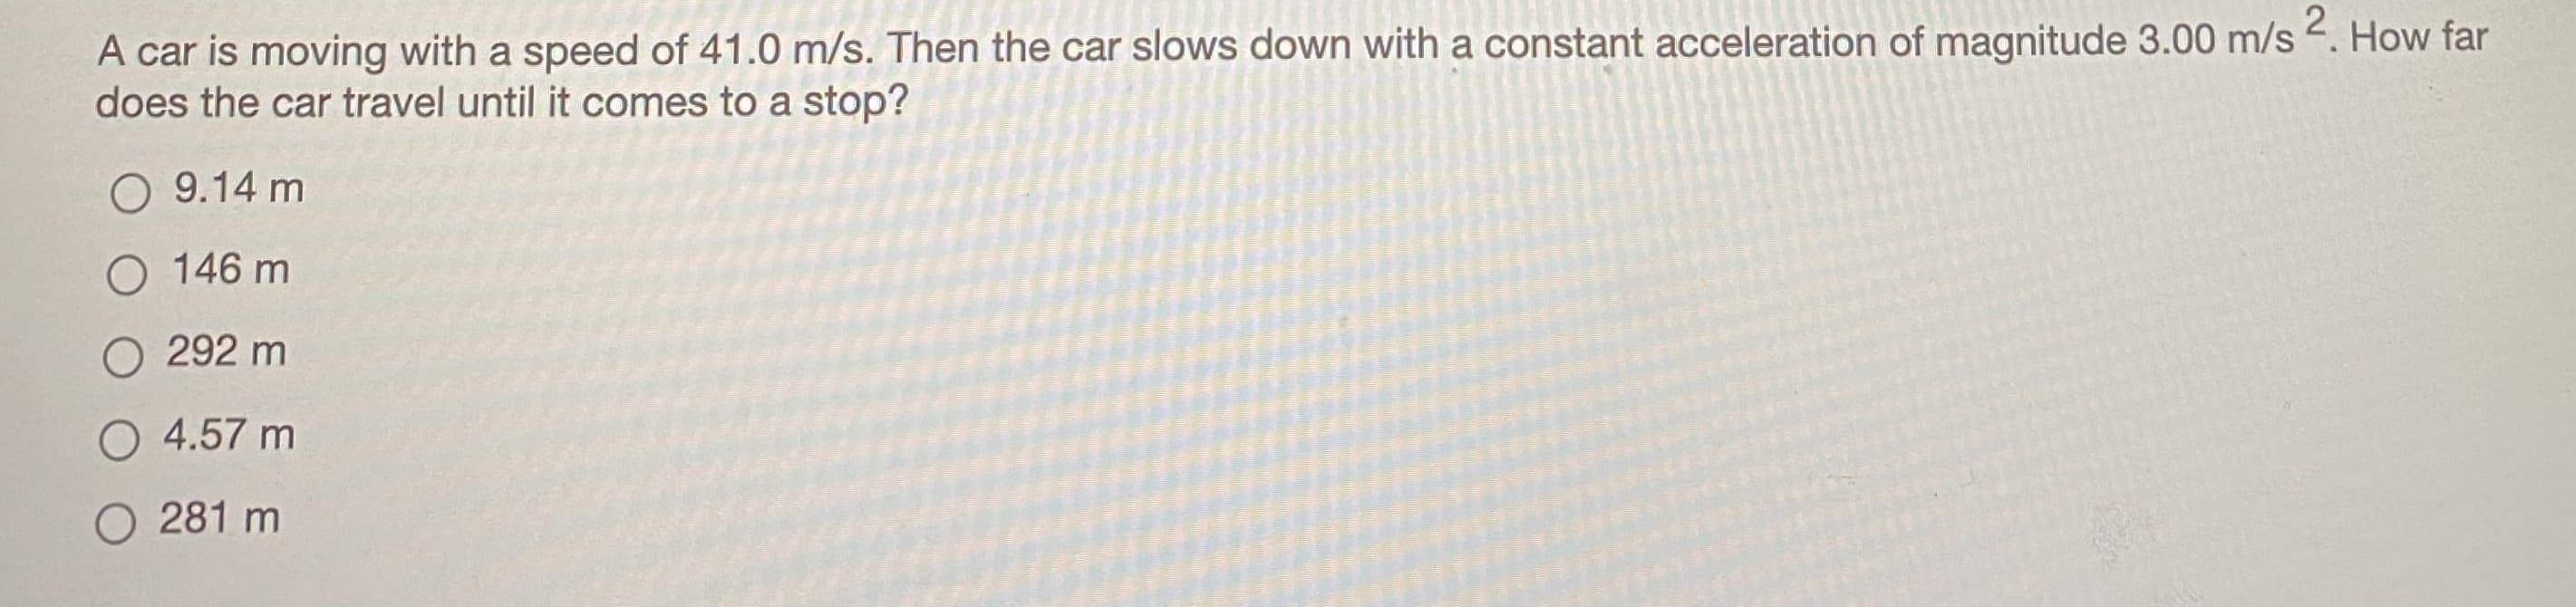 A car is moving with a speed of 41.0 m/s. Then the car slows down with a constant acceleration of magnitude 3.00 m/s . How far
does the car travel until it comes to a stop?
